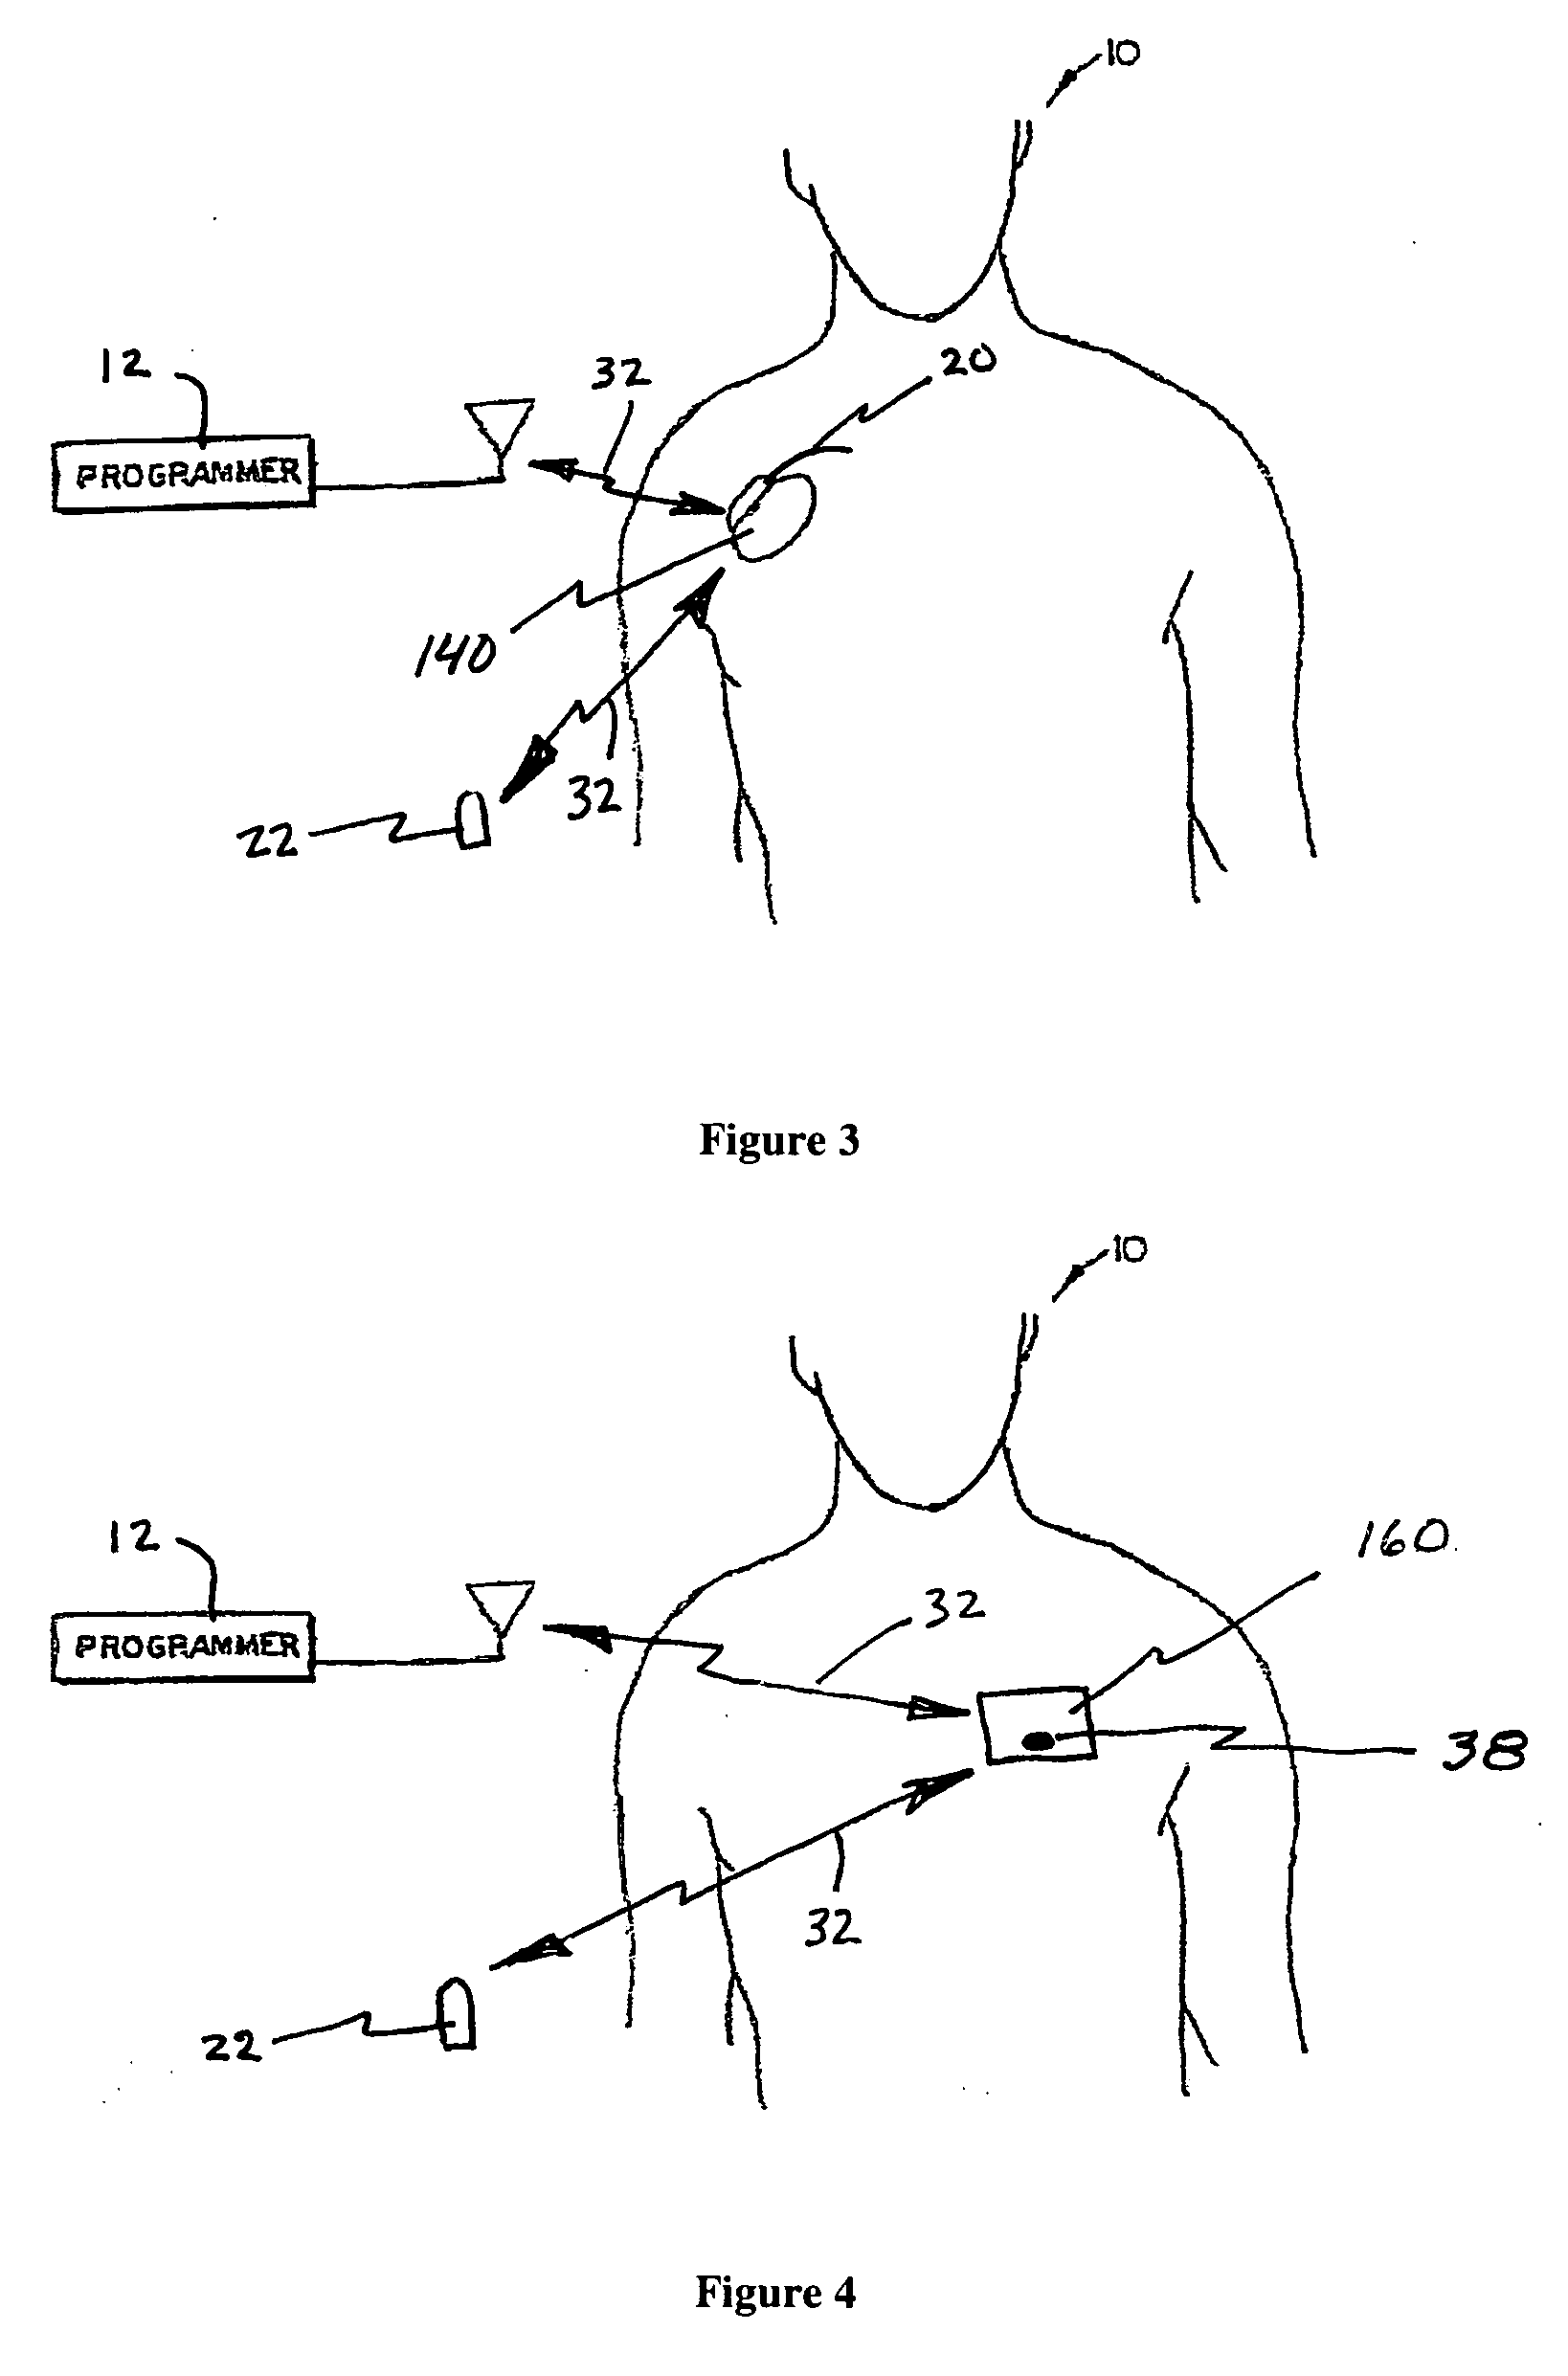 System and method for regulating cardiac triggered therapy to the brain